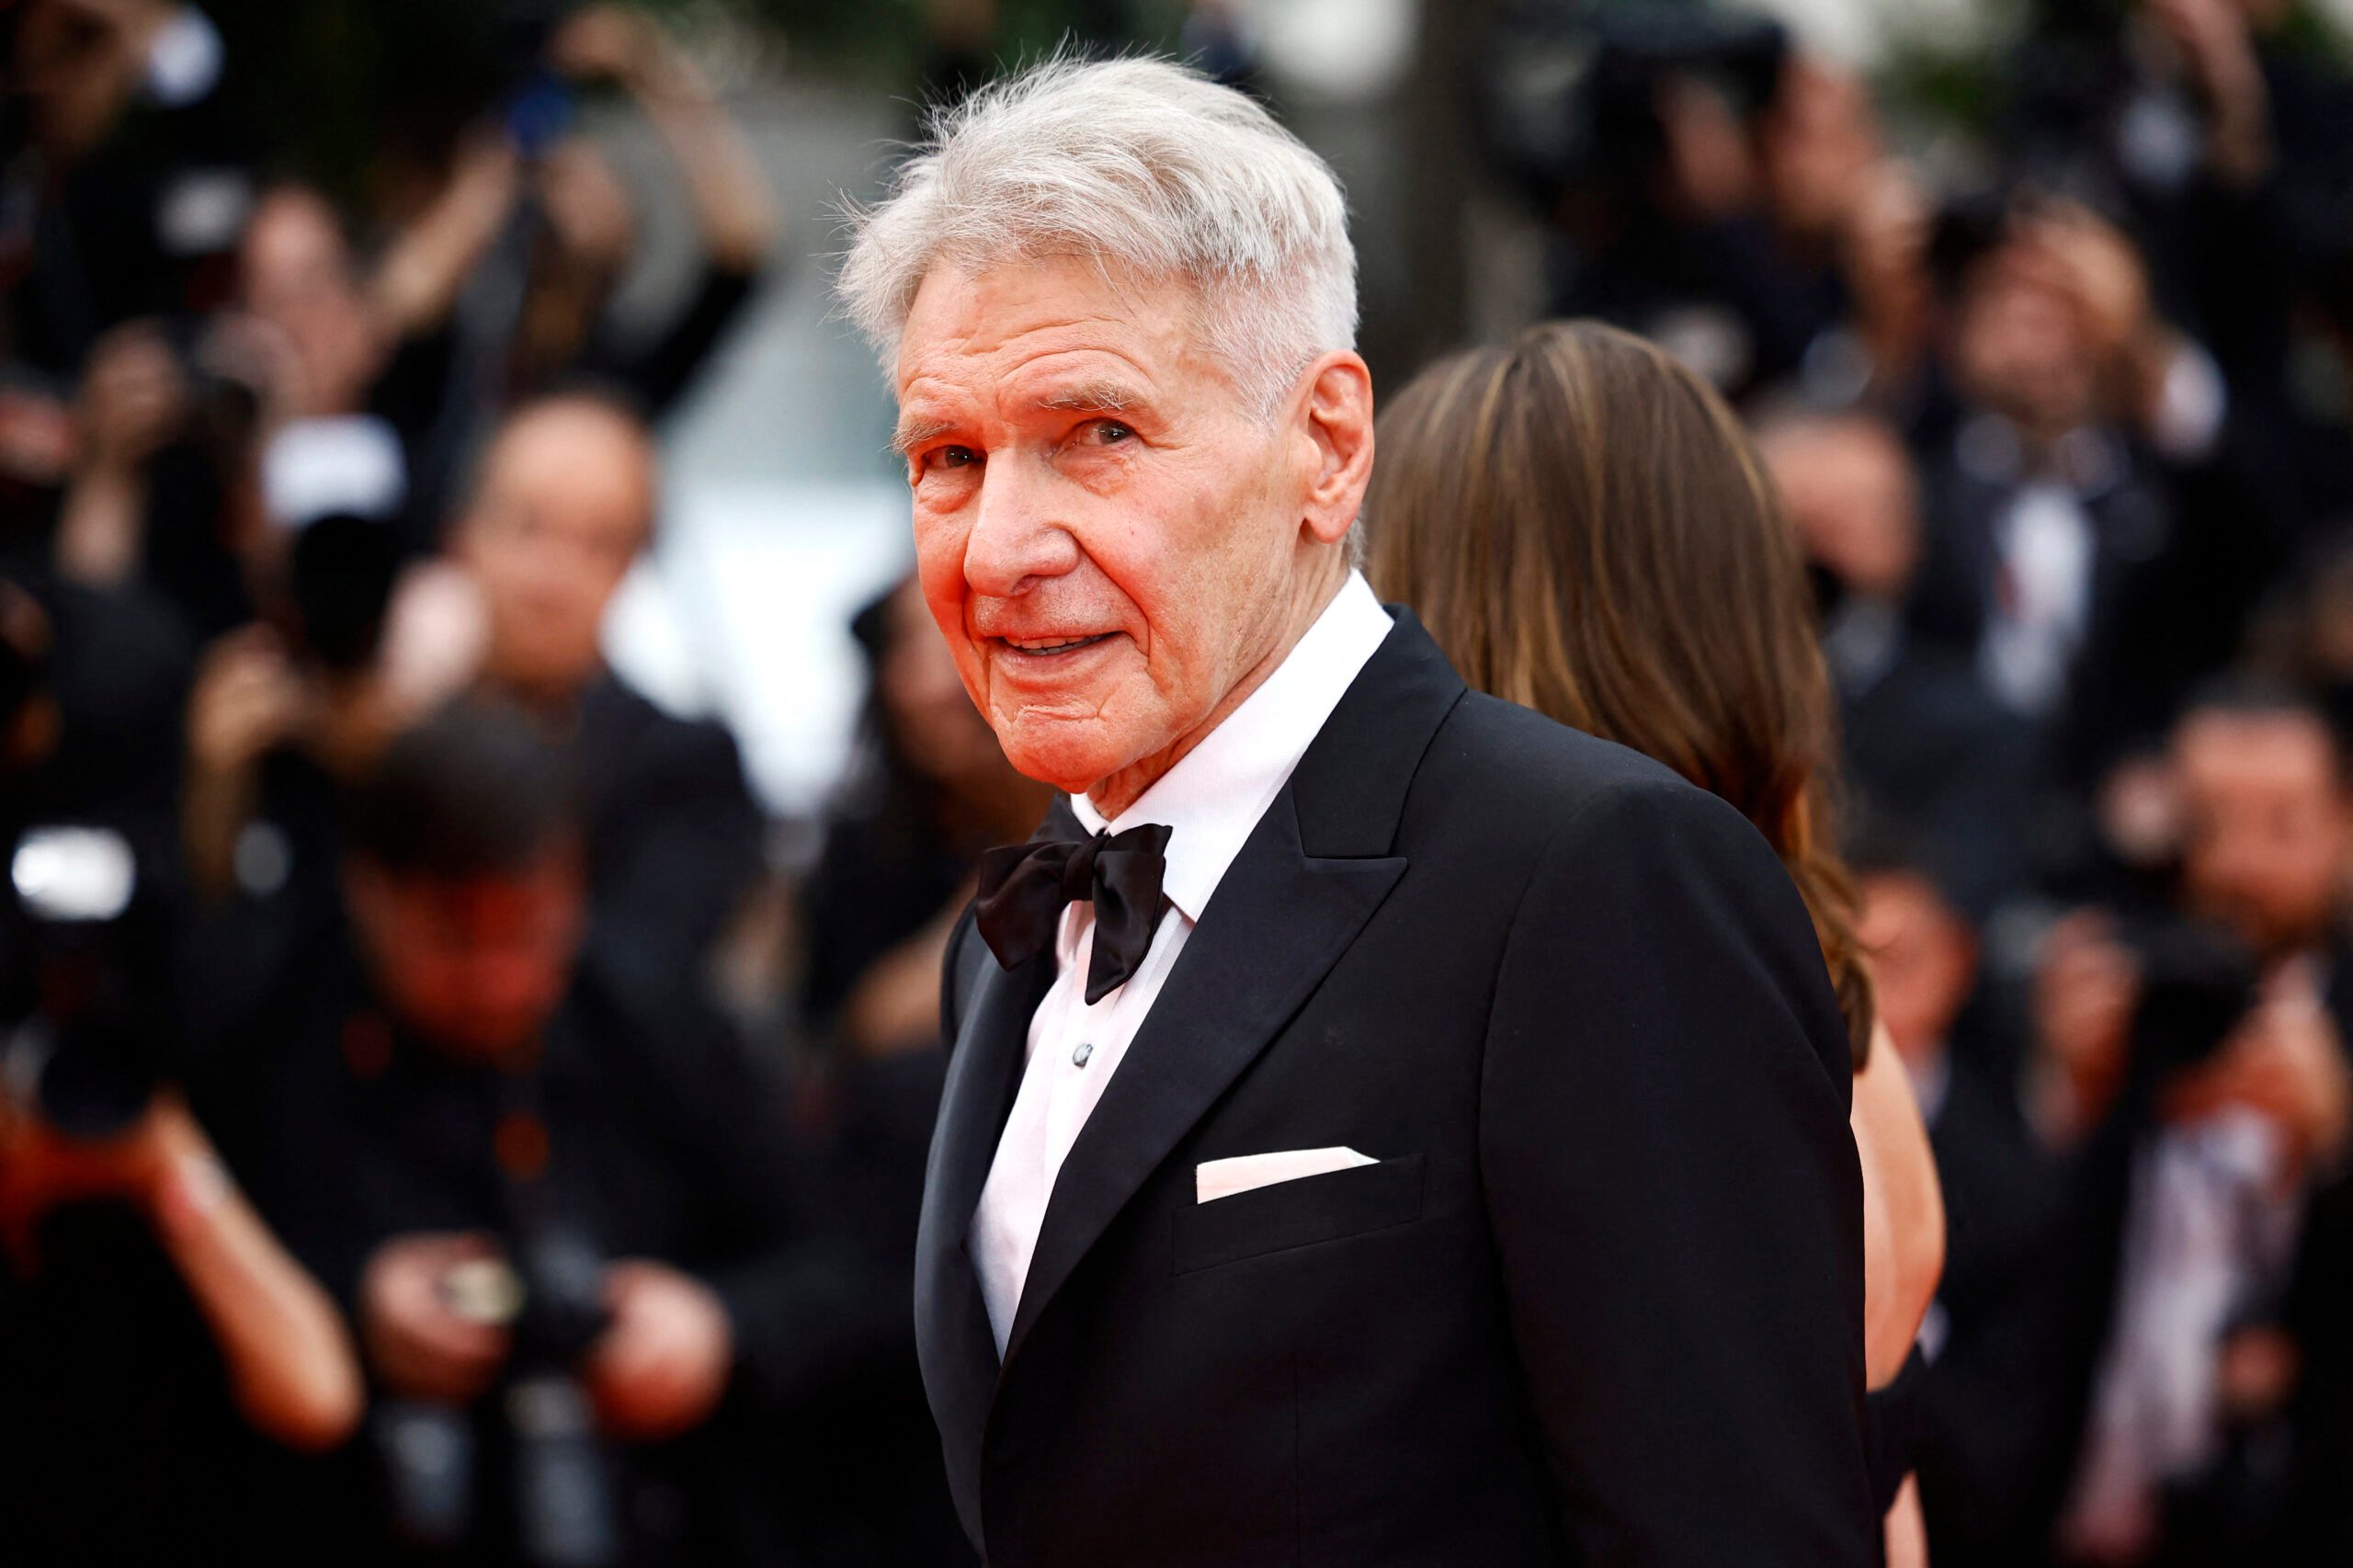 Indiana Jones 5: First Reviews From Cannes Film Festival